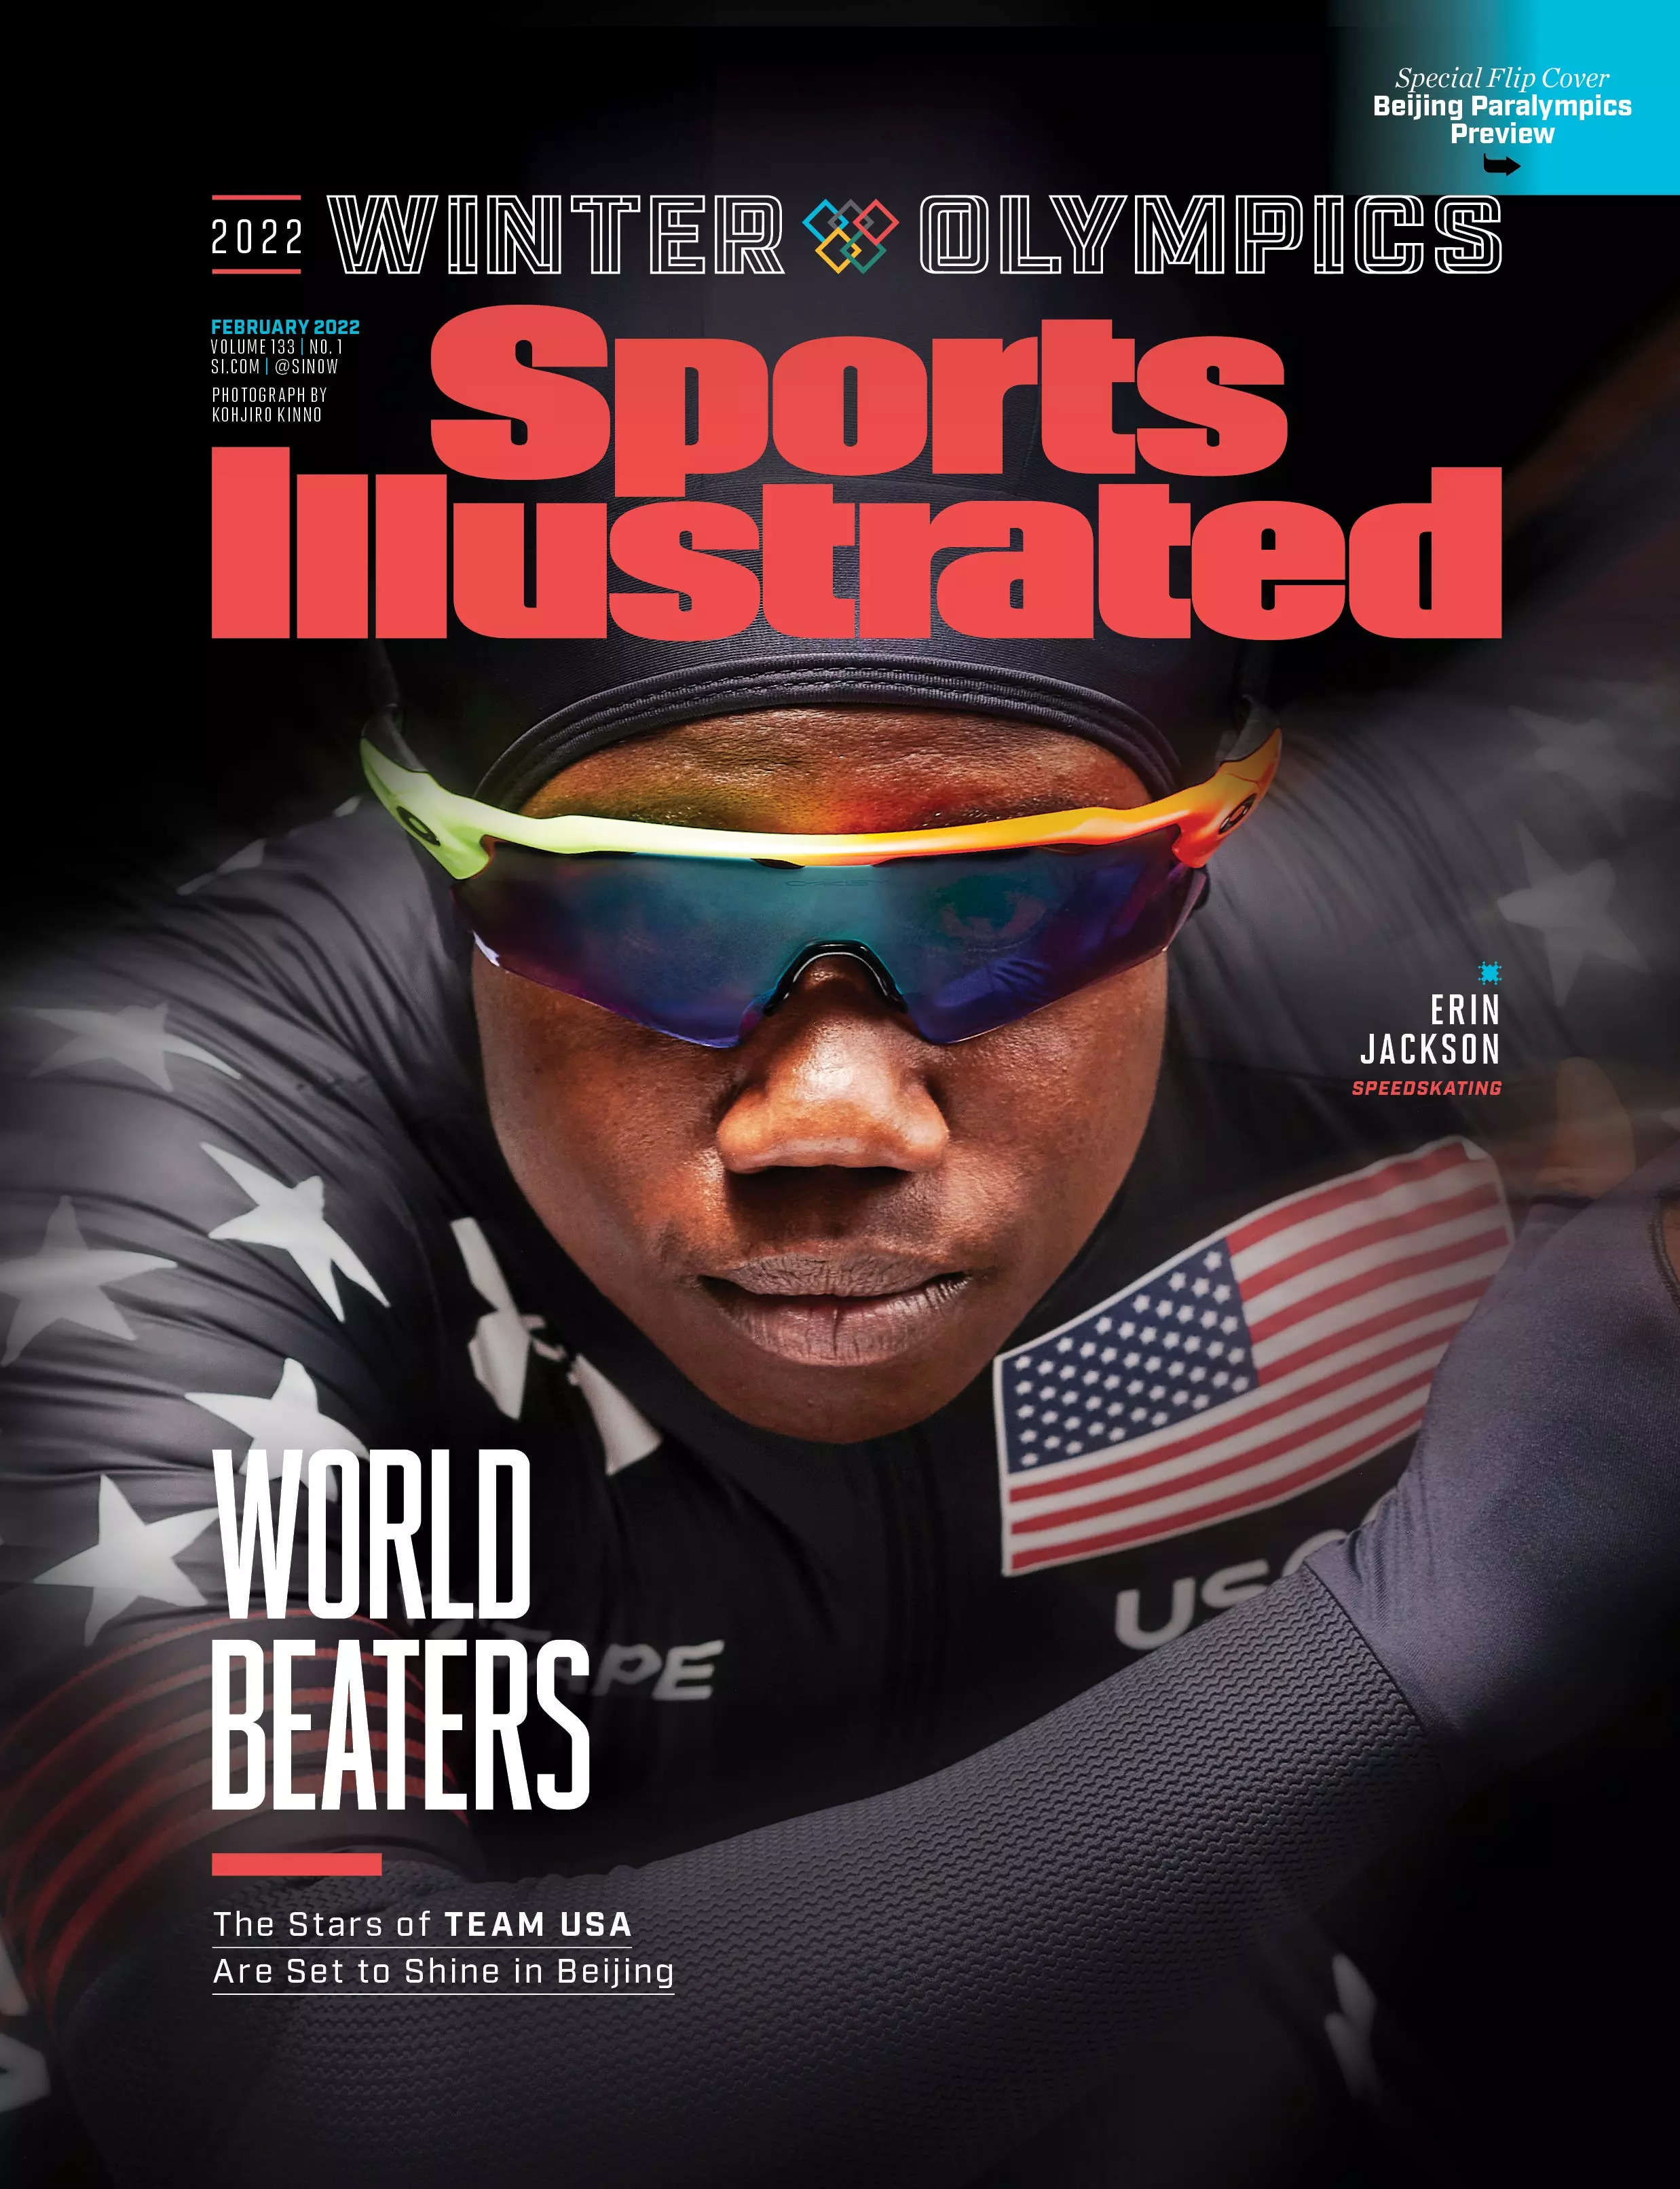 Erin Jackson is one of four cover athletes for Sports Illustrated